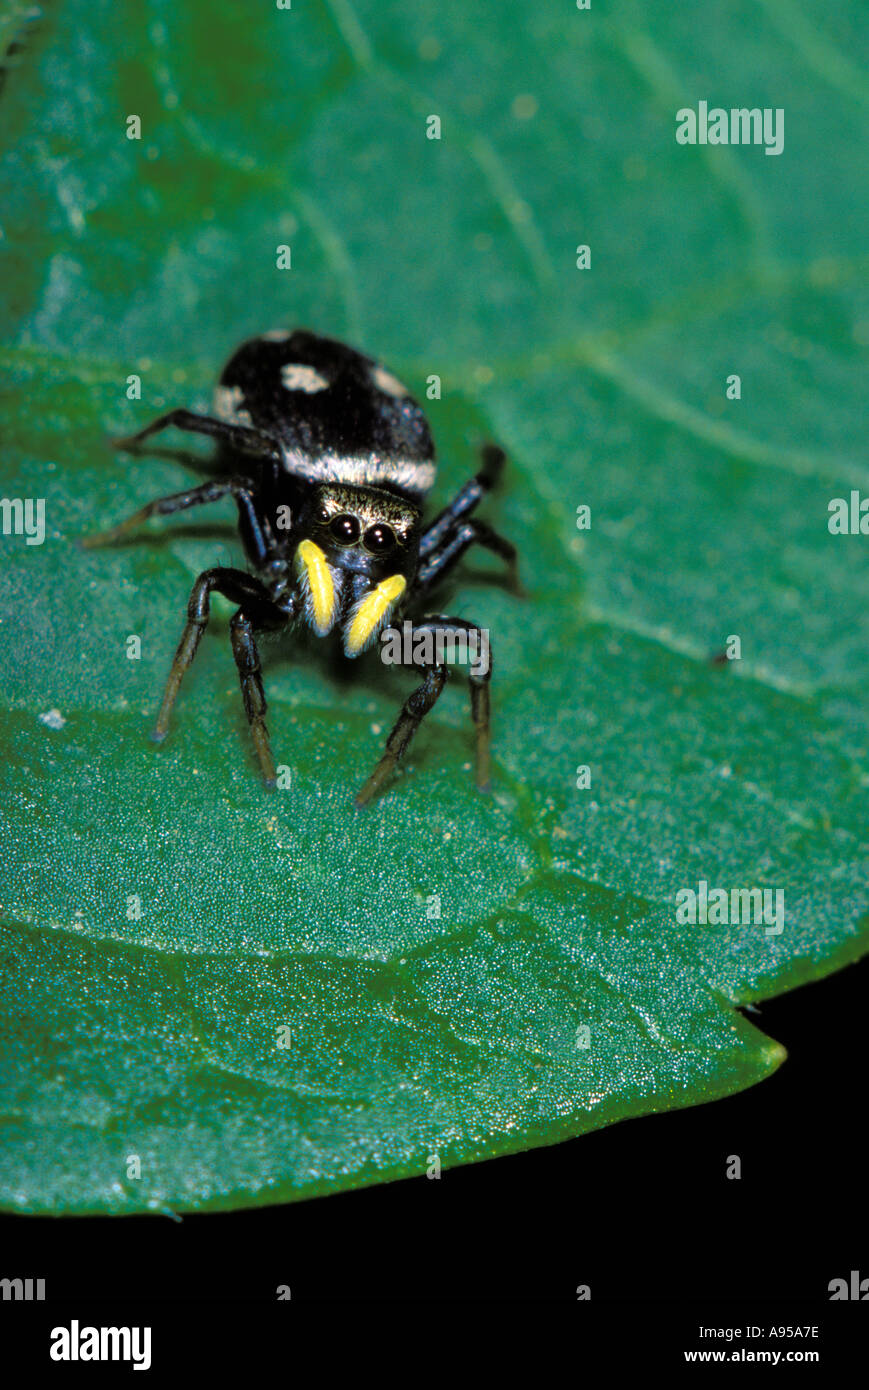 Jumping Spider, Heliophanus sp. On leaf. Front view Stock Photo